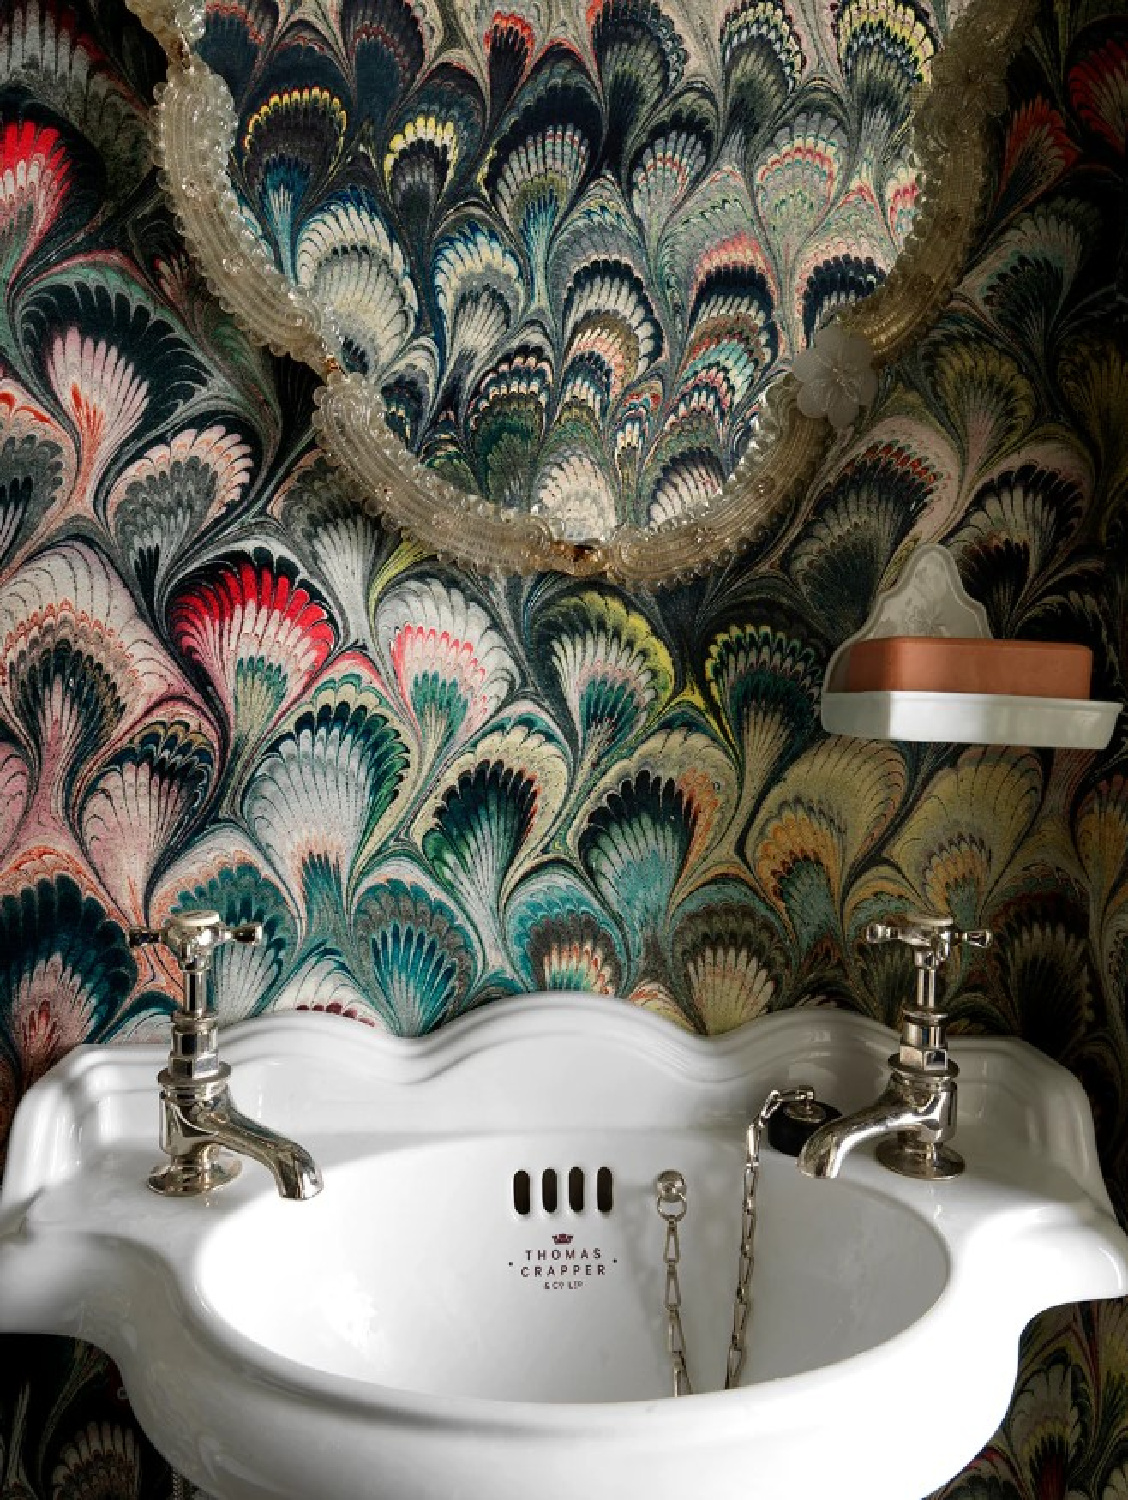 Bold wallcovering and sink with scallops in a Beata Heuman designed bath. Photo: Simon Brown.